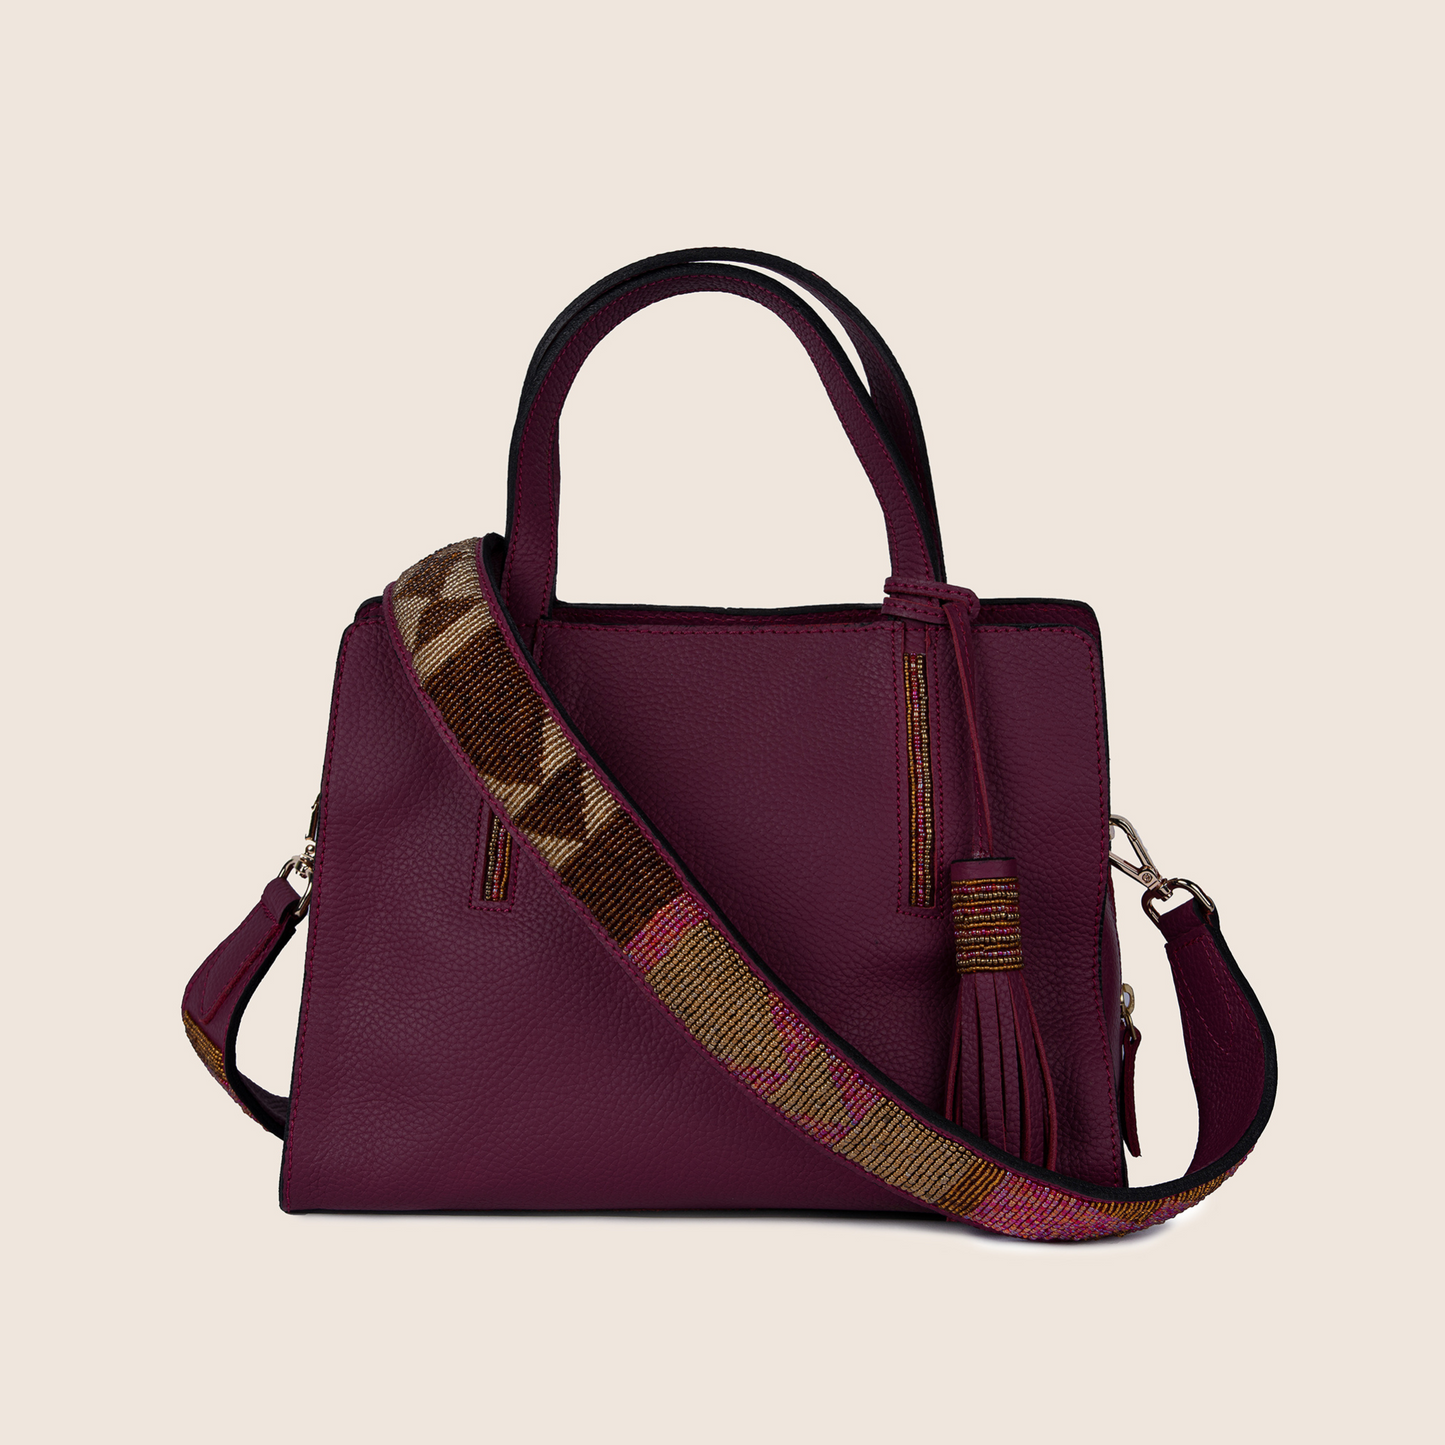 Kate bag in sangaria milled leather and with Maasai beaded strap.